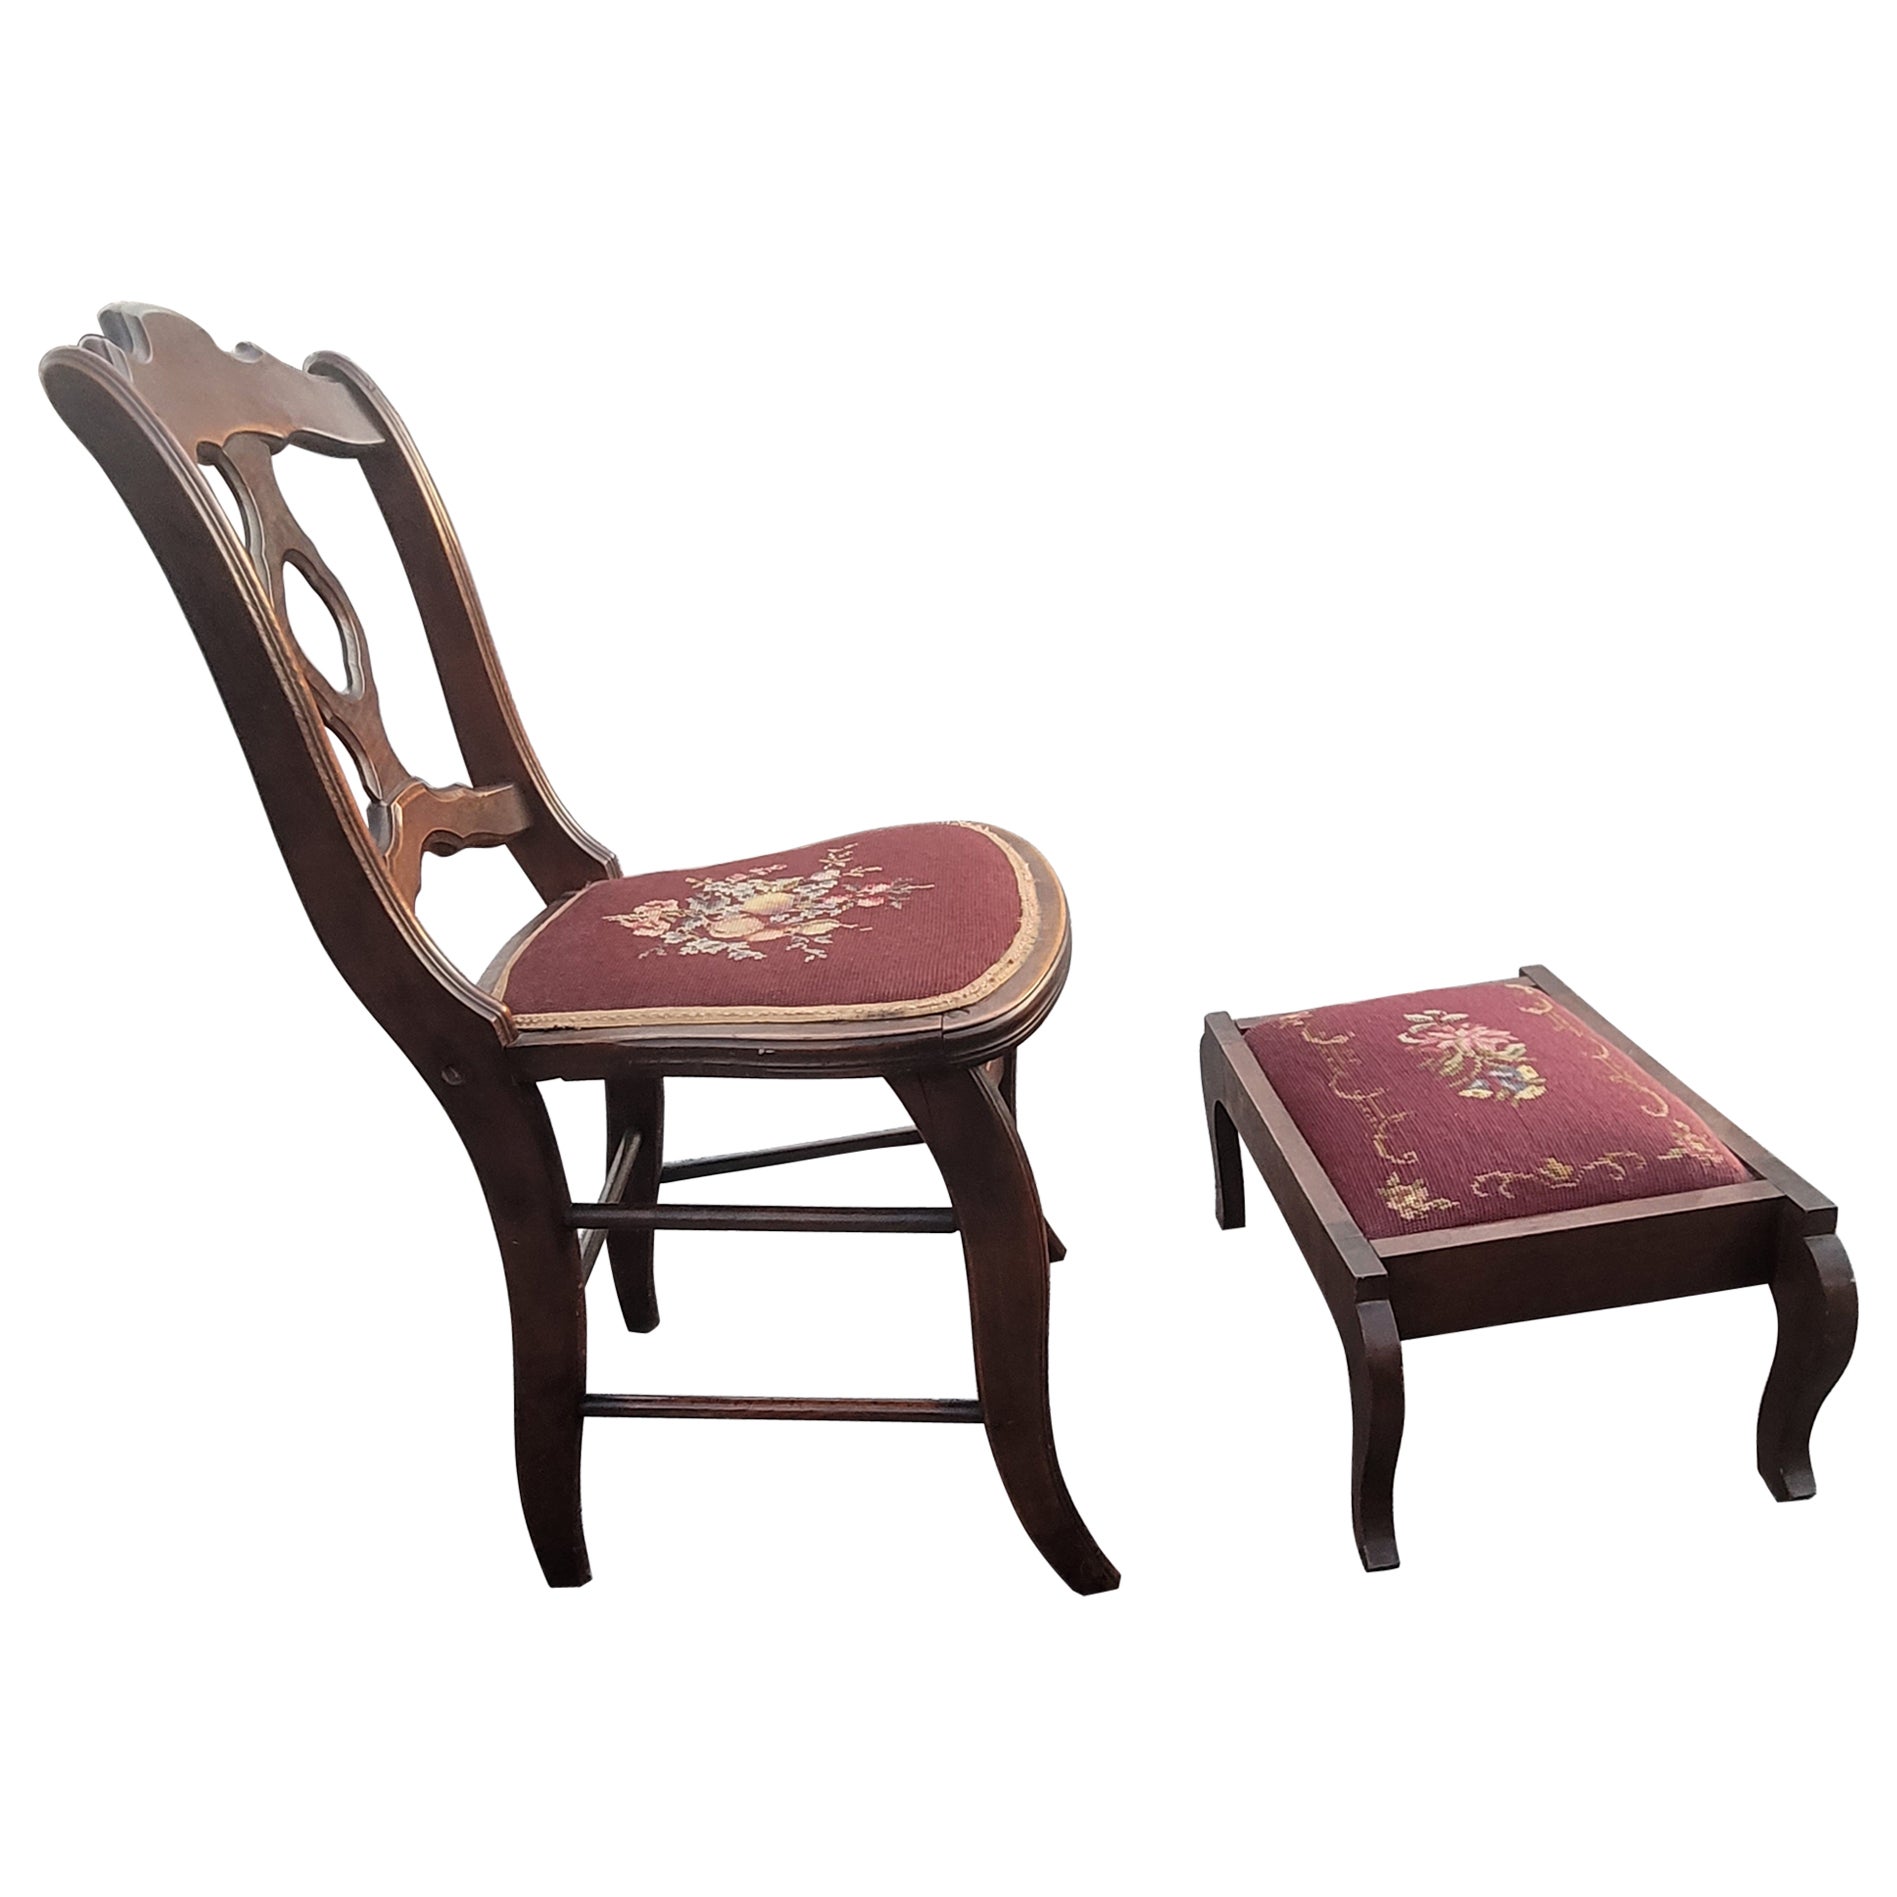 Late 19th Century Mahogany and Needlepoint Upholstered Chair with Footstool